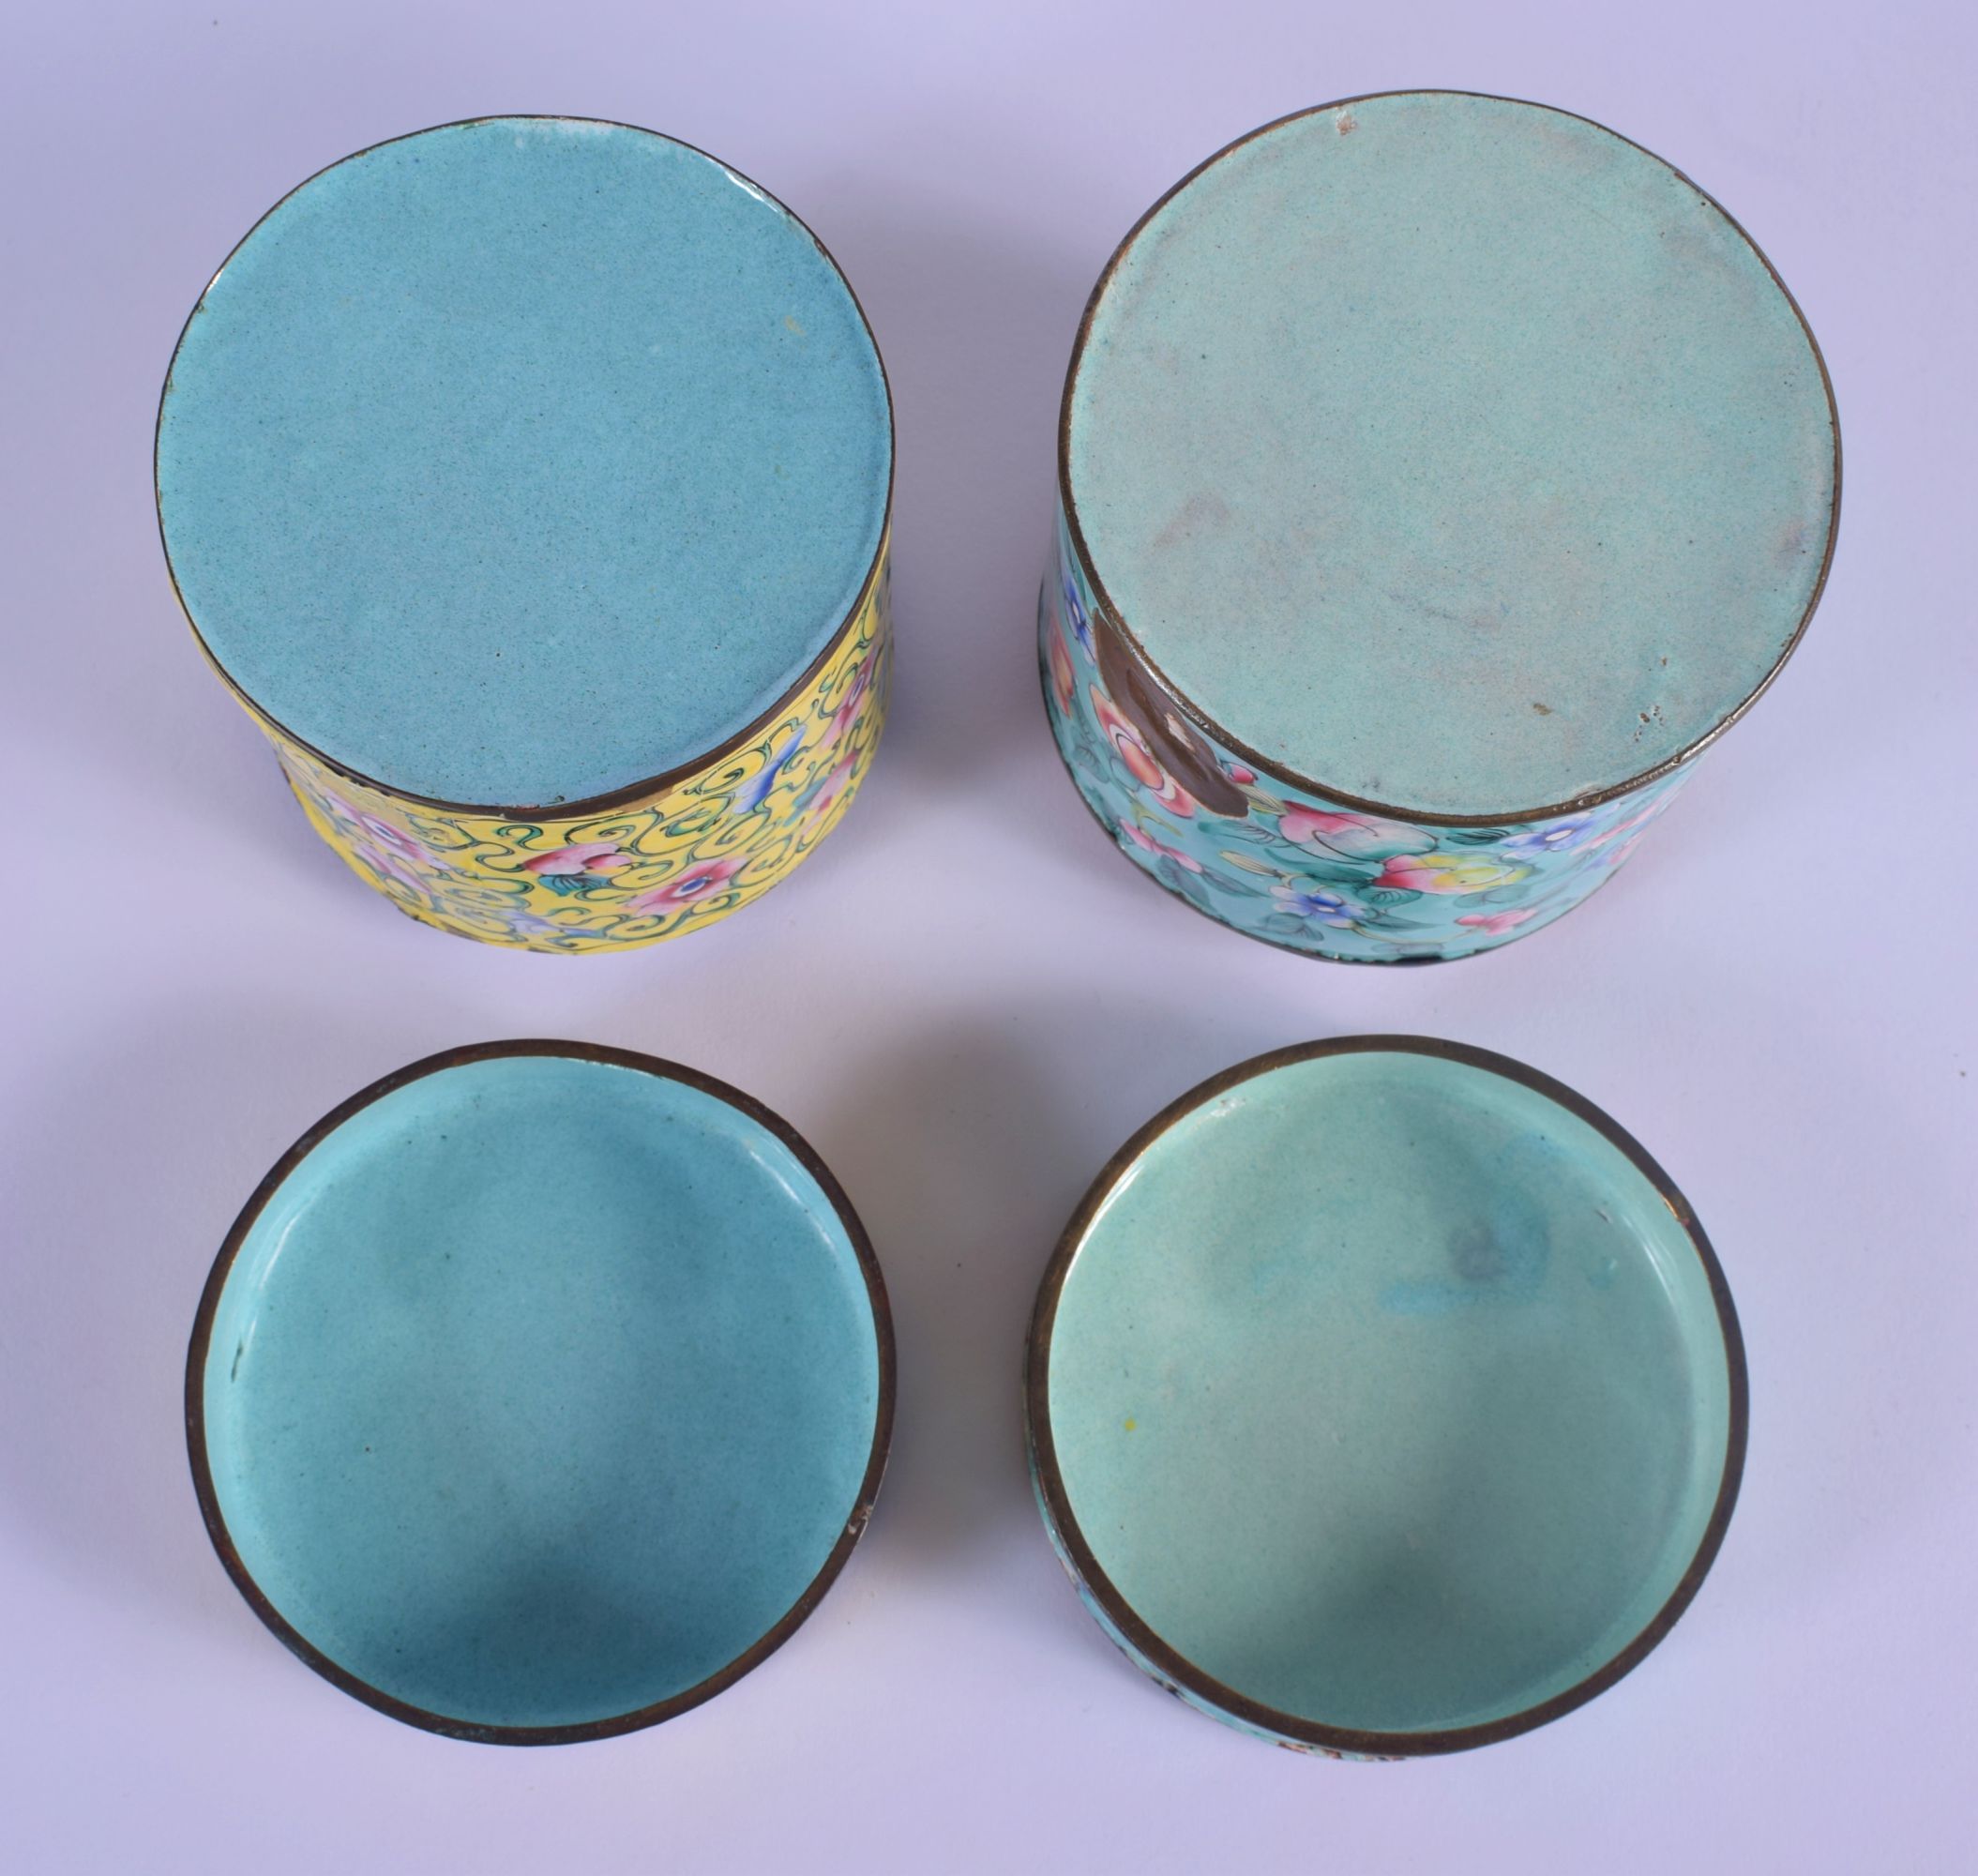 TWO LATE 19TH CENTURY CHINESE CANTON ENAMEL BOXES AND COVERS Qing. 9 cm x 6 cm. (2) - Image 4 of 4